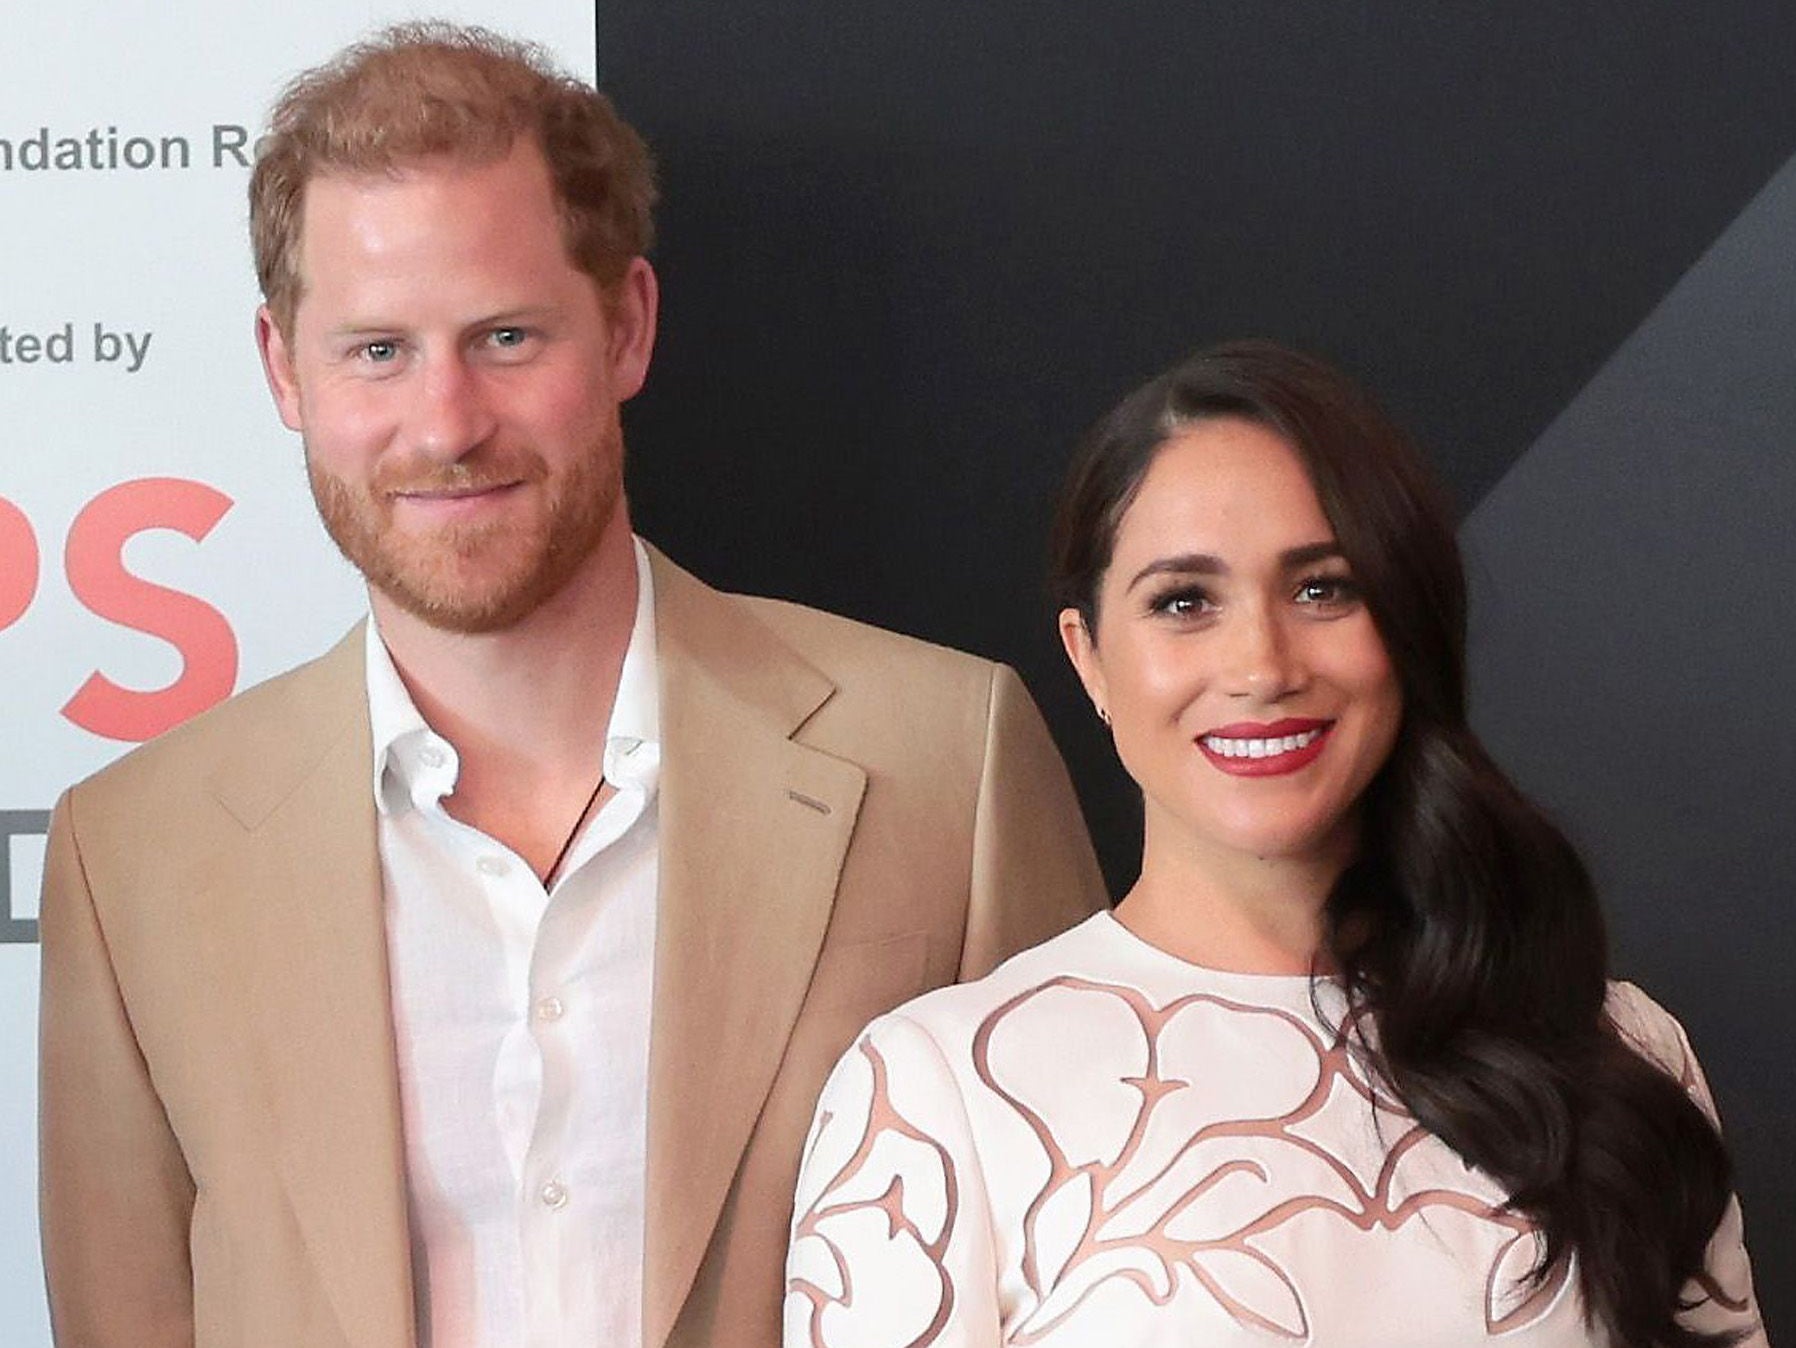 Duke and Duchess of Sussex attended the 2nd day of Invictus Games 2022